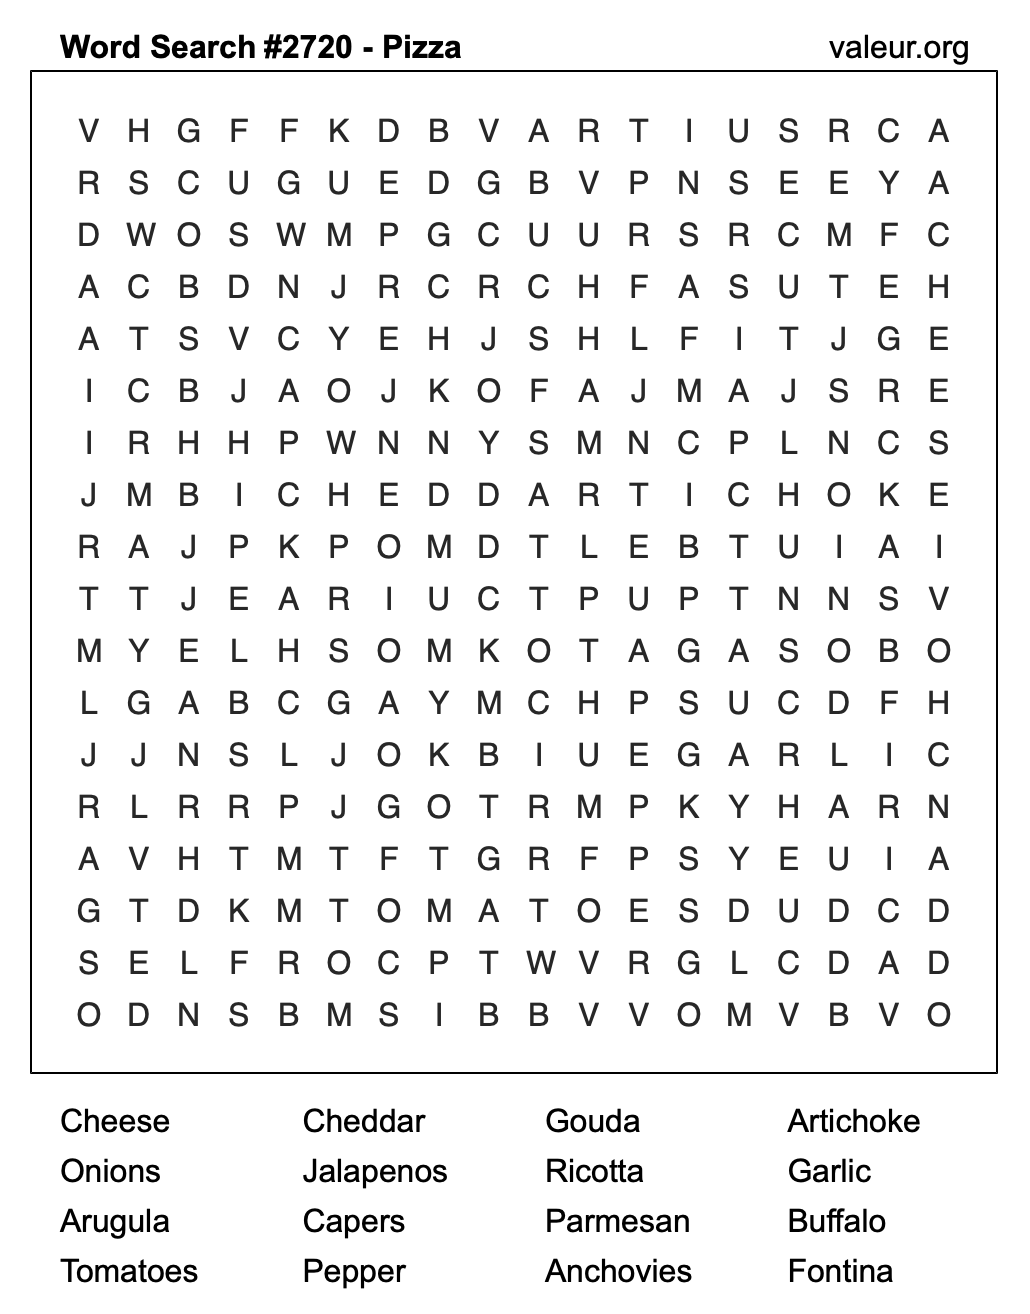 Pizza Word Search Puzzle #2720